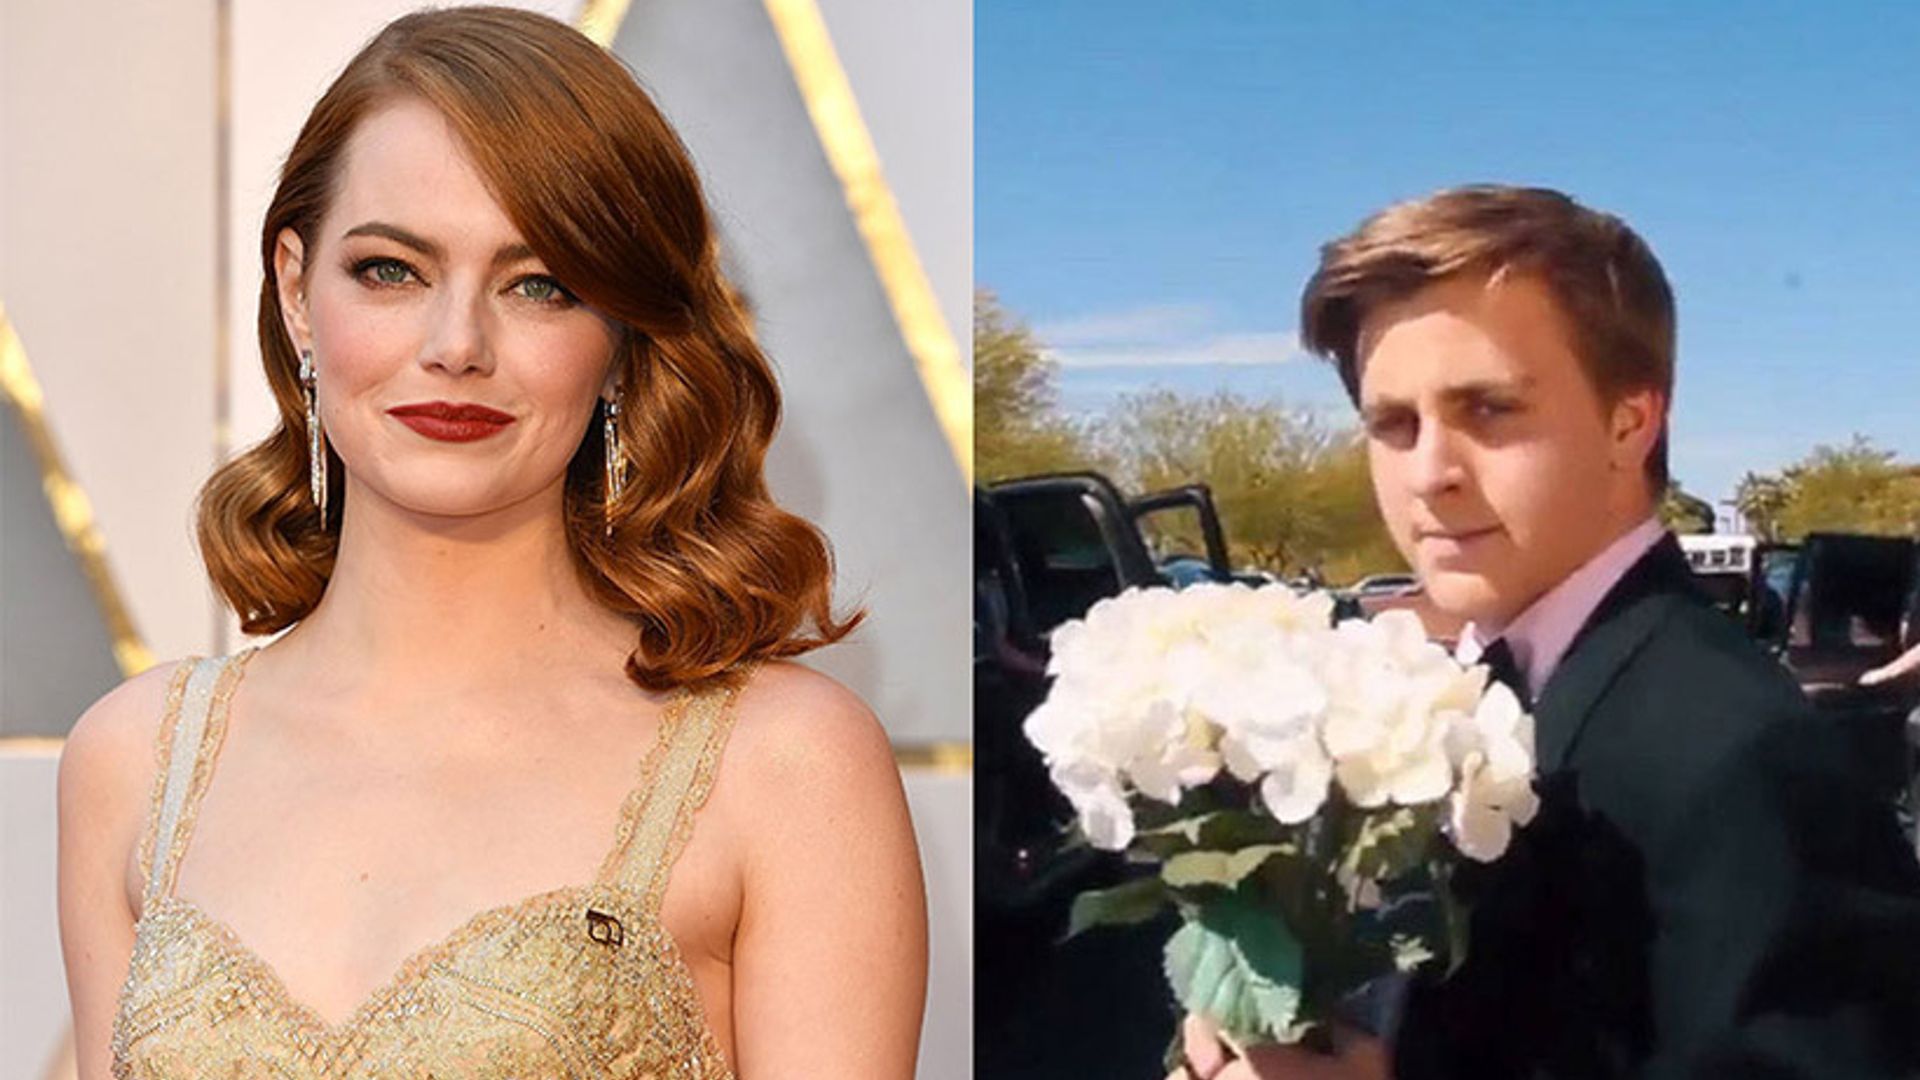 Emma Stone asked to prom in epic ‘La La Land’ inspired proposal